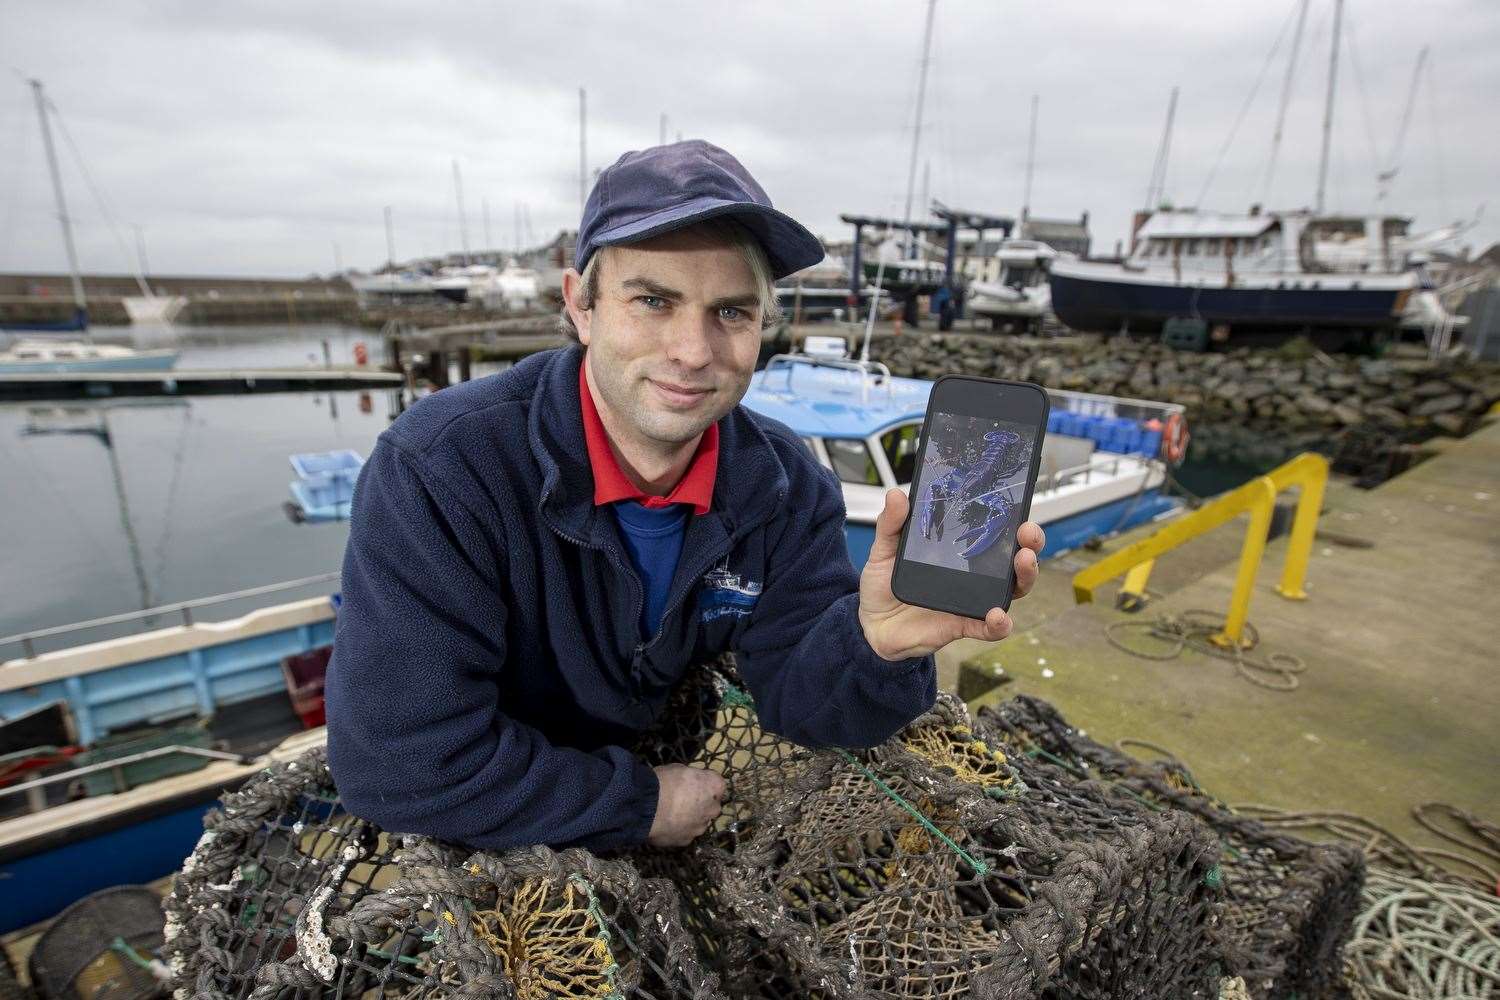 Stuart Brown, skipper of the Huntress fishing boat, shows a picture of the blue lobster (Liam McBurney/PA)